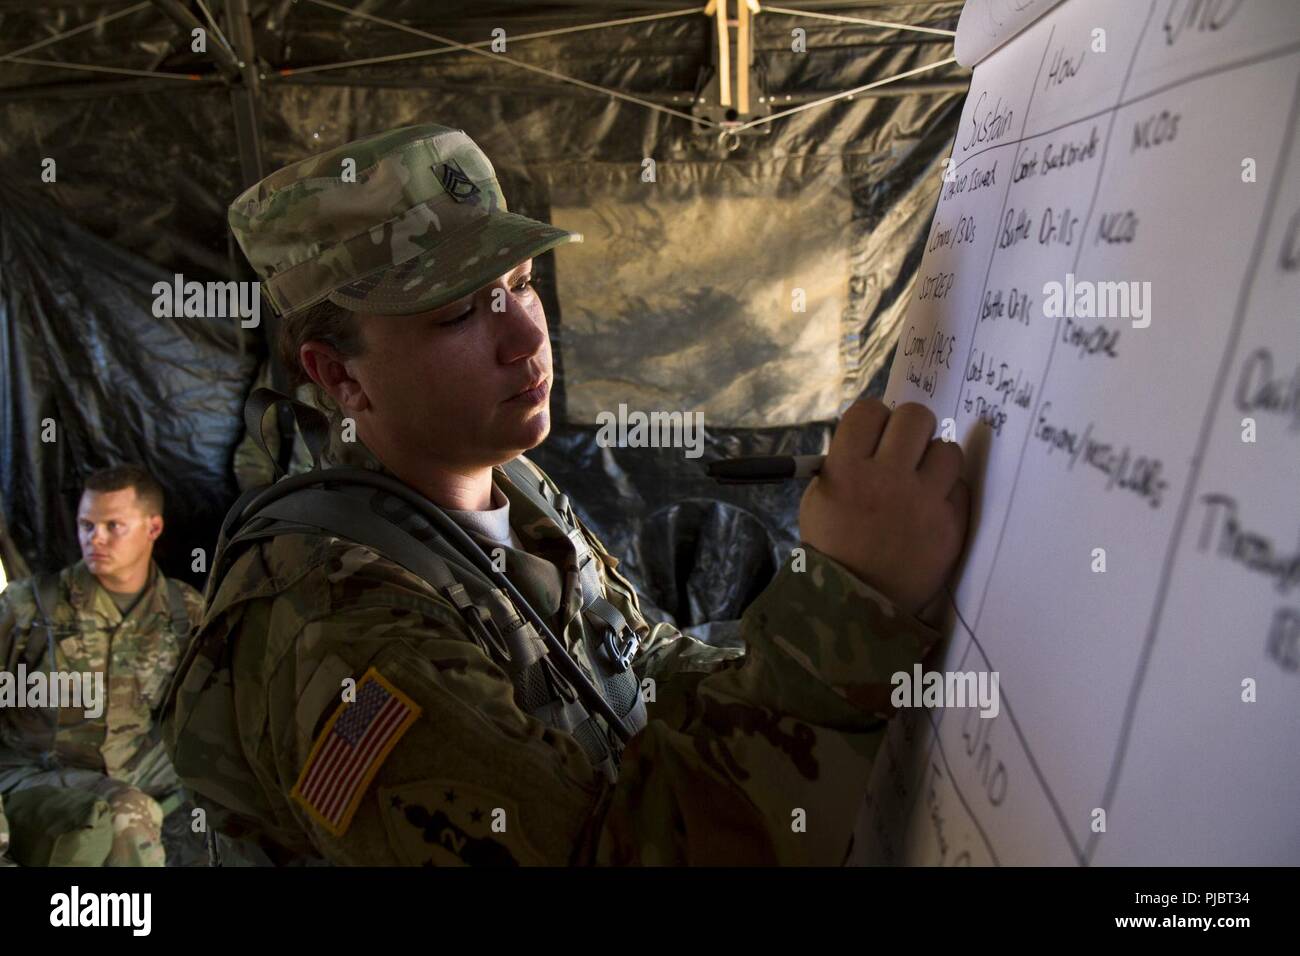 FORT HUNTER LIGGETT-- U.S. Army Reserve Staff Sgt. Amanda Ray of the 2340th OC/T Battalion, Louisville, Kentucky takes notes for Soldiers conducting an after action review during the 91st Training Division's Combat Support Training Exercise (CSTX), July 12, 2018 in Ft. Hunter Liggett, California.  CSTX 91-18-01 that ensures America’s Army Reserve units and Soldiers are trained and ready to deploy and bring capable, combat-ready, and lethal firepower in support of the Army and our joint partners anywhere in the world. Stock Photo